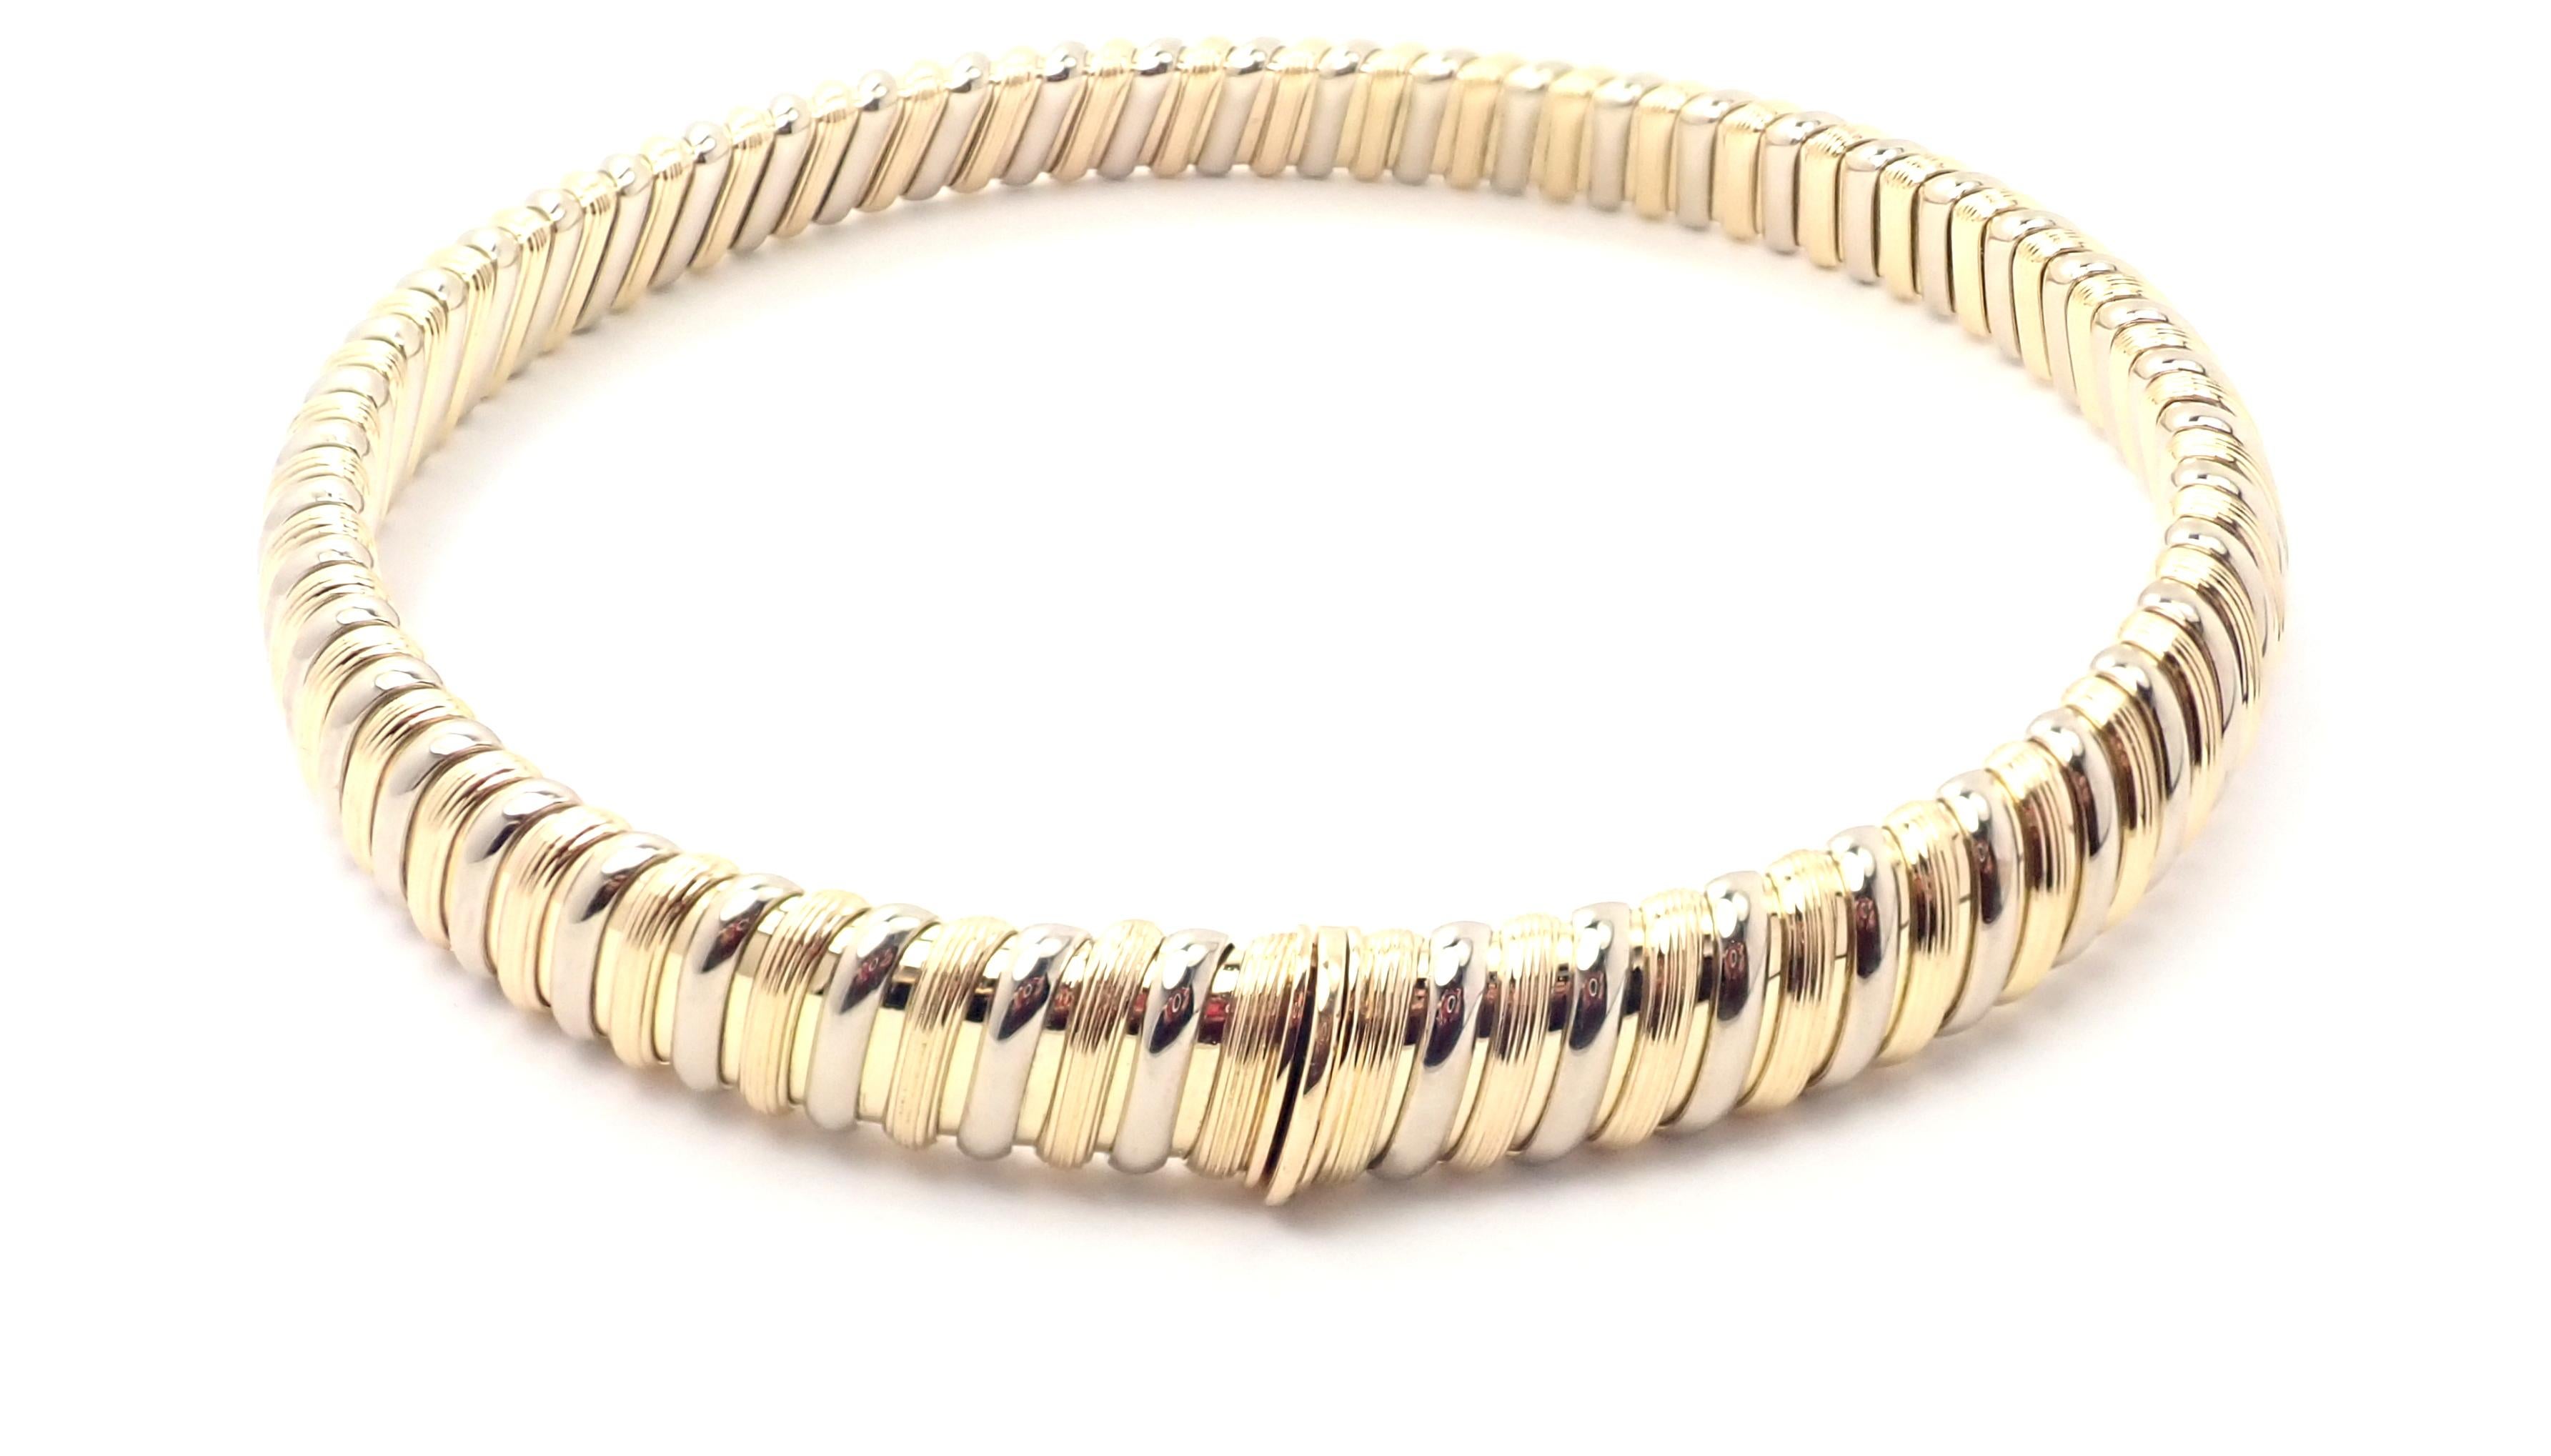 18k Yellow And White Gold Tubogas Necklace by Bulgari. 
Details: 
Length: 16 3/4